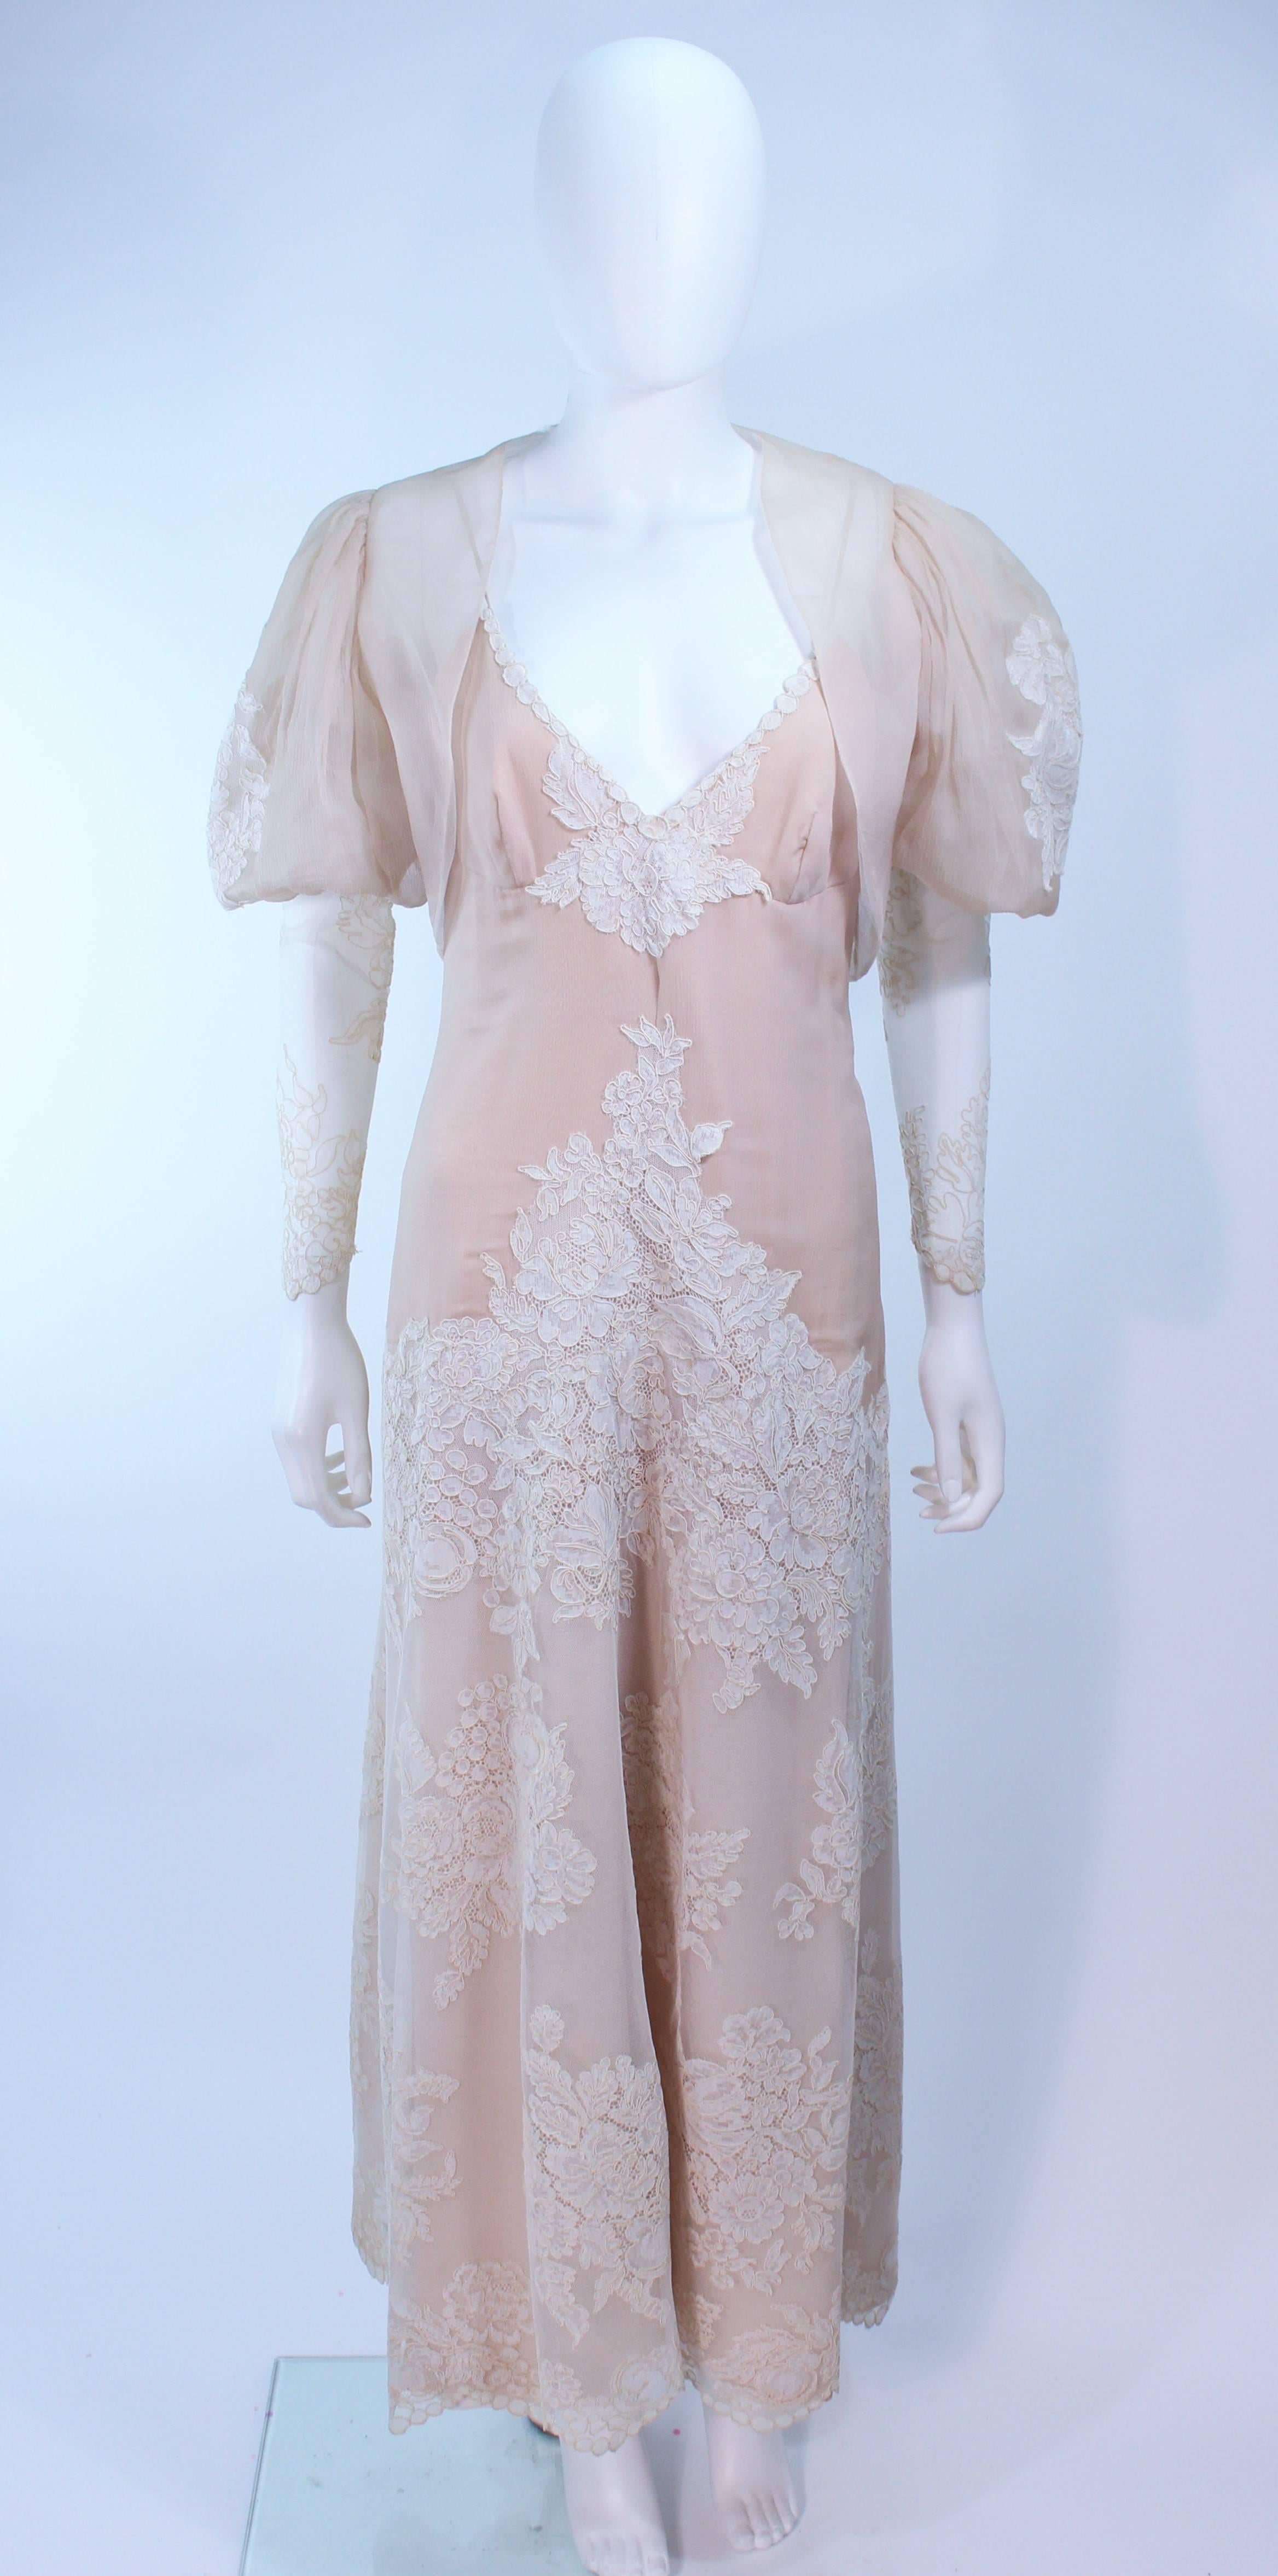 This ensemble is composed of a nude chiffon with white lace. Features separate lace sleeves, a puff sleeve bolero, and gown. The gown features a center back zipper. In excellent vintage condition.

**Please cross-reference measurements for